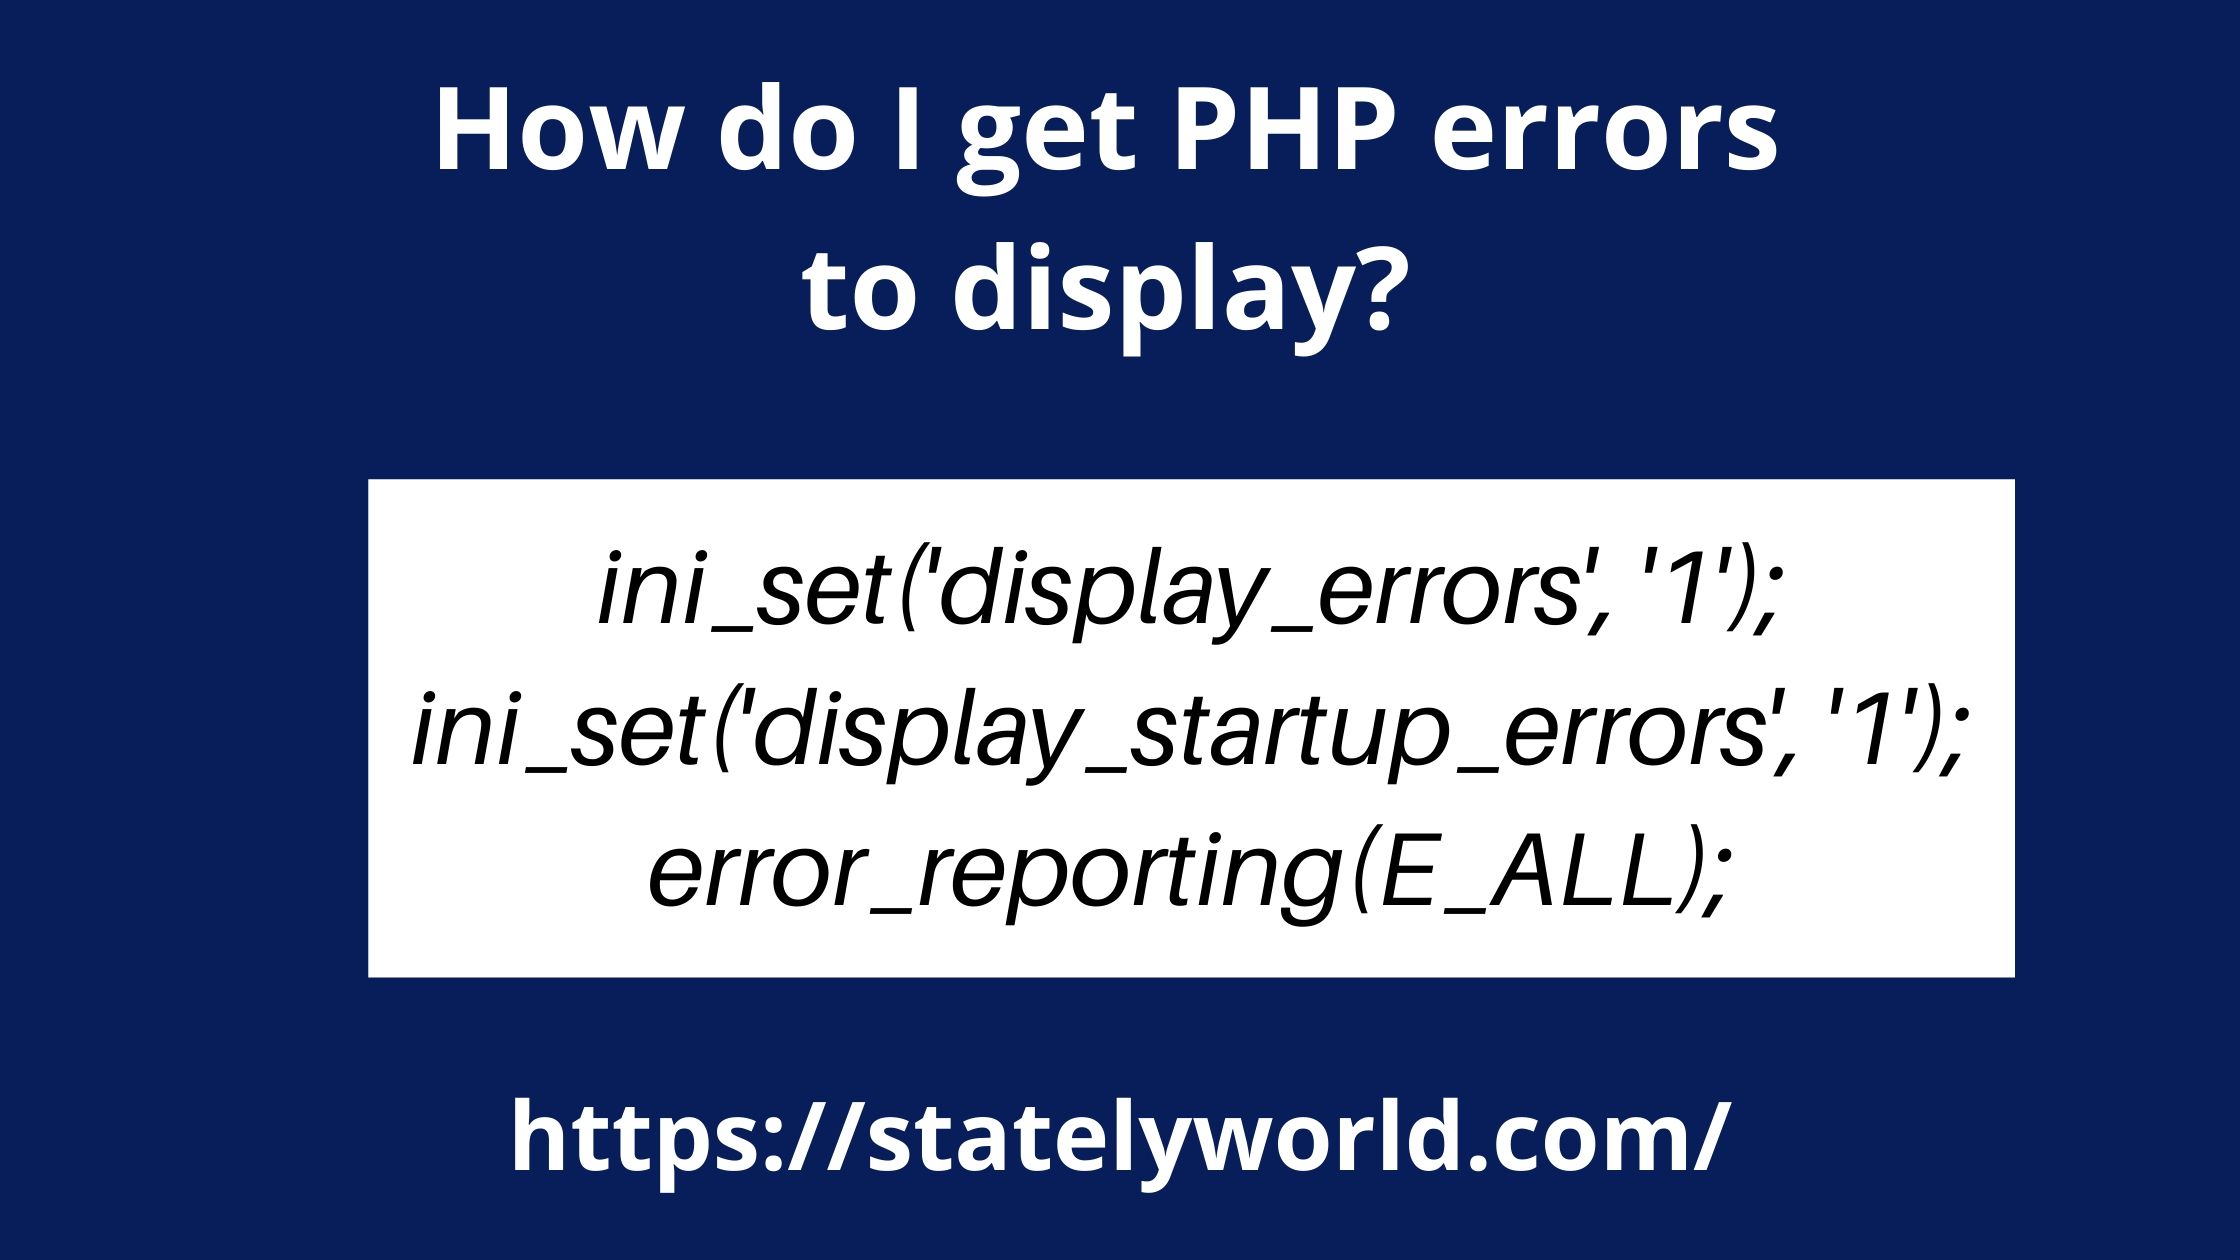 How do I get PHP errors to display?